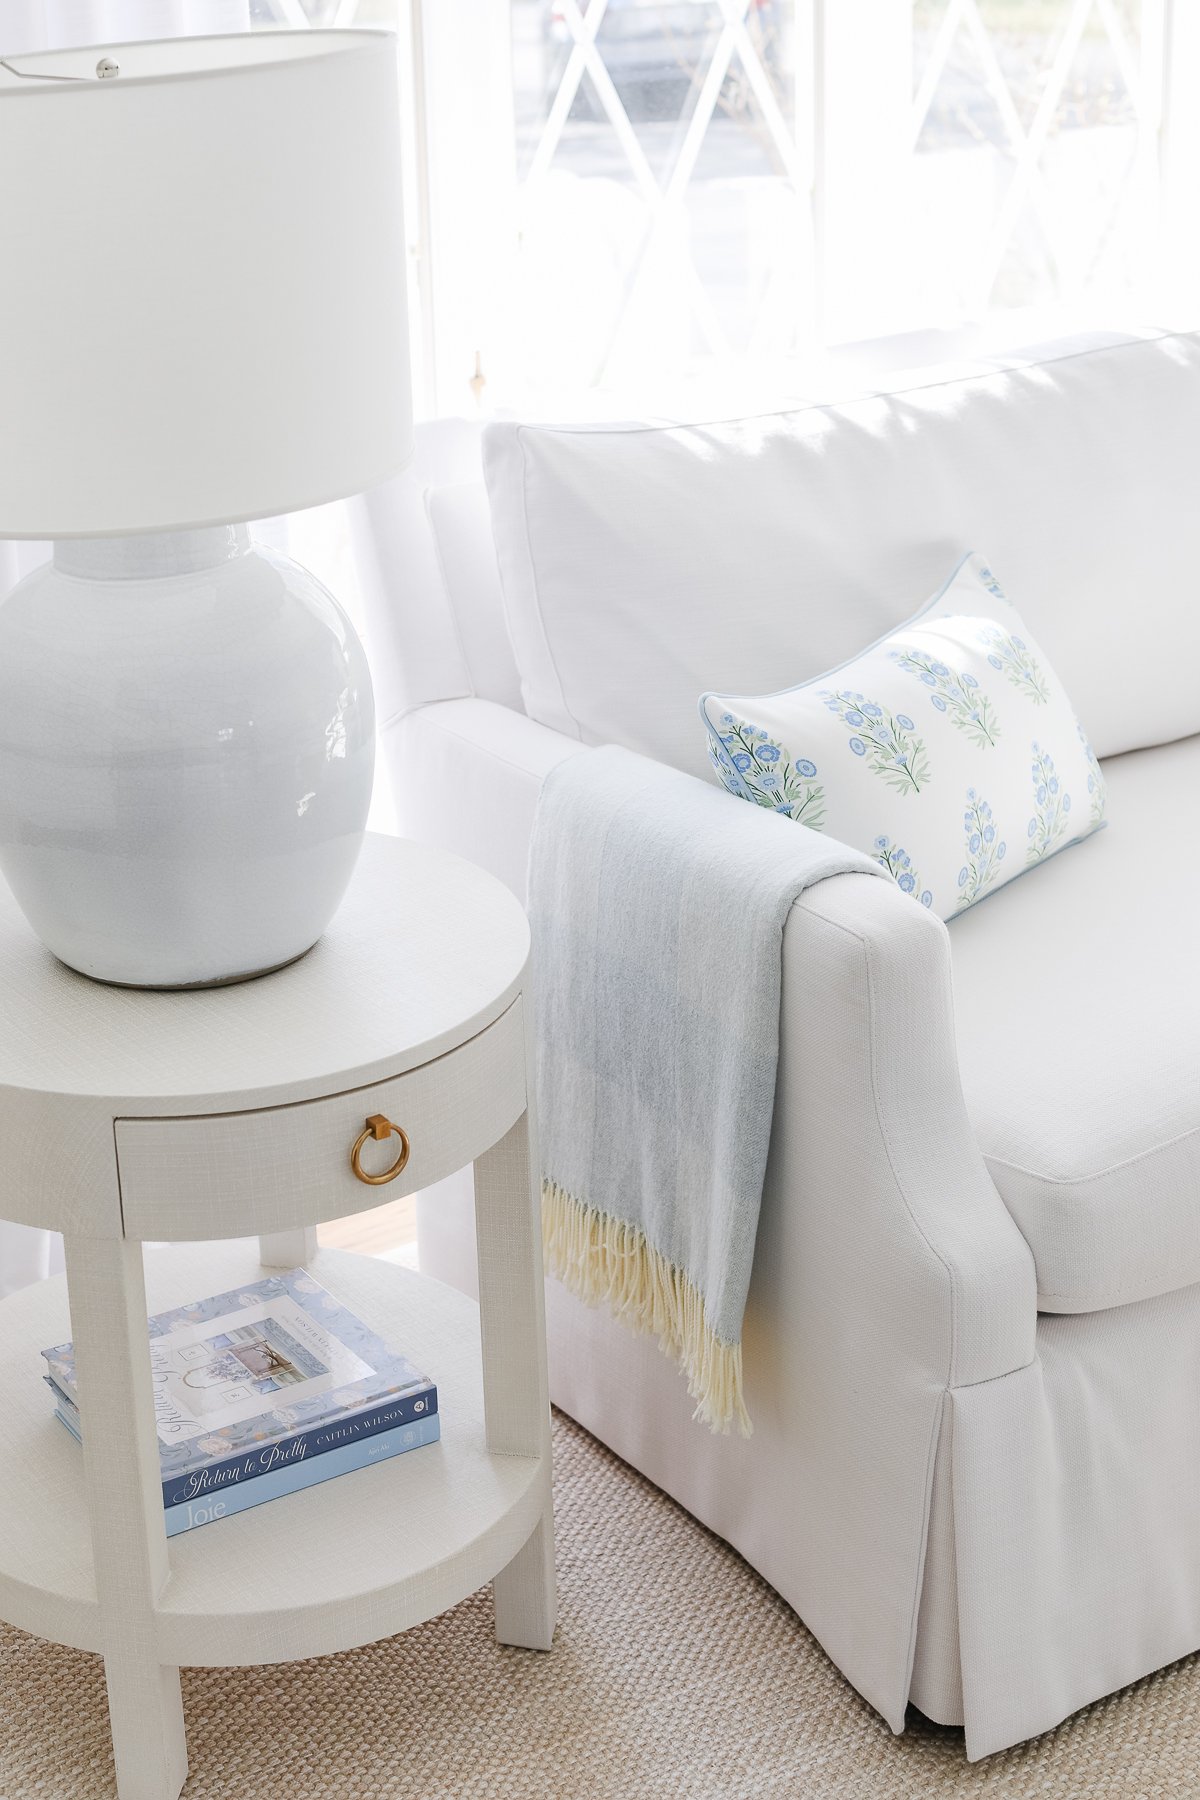 A white sofa with a floral pillow and blue throw blanket next to a round side table holding a white lamp and books.